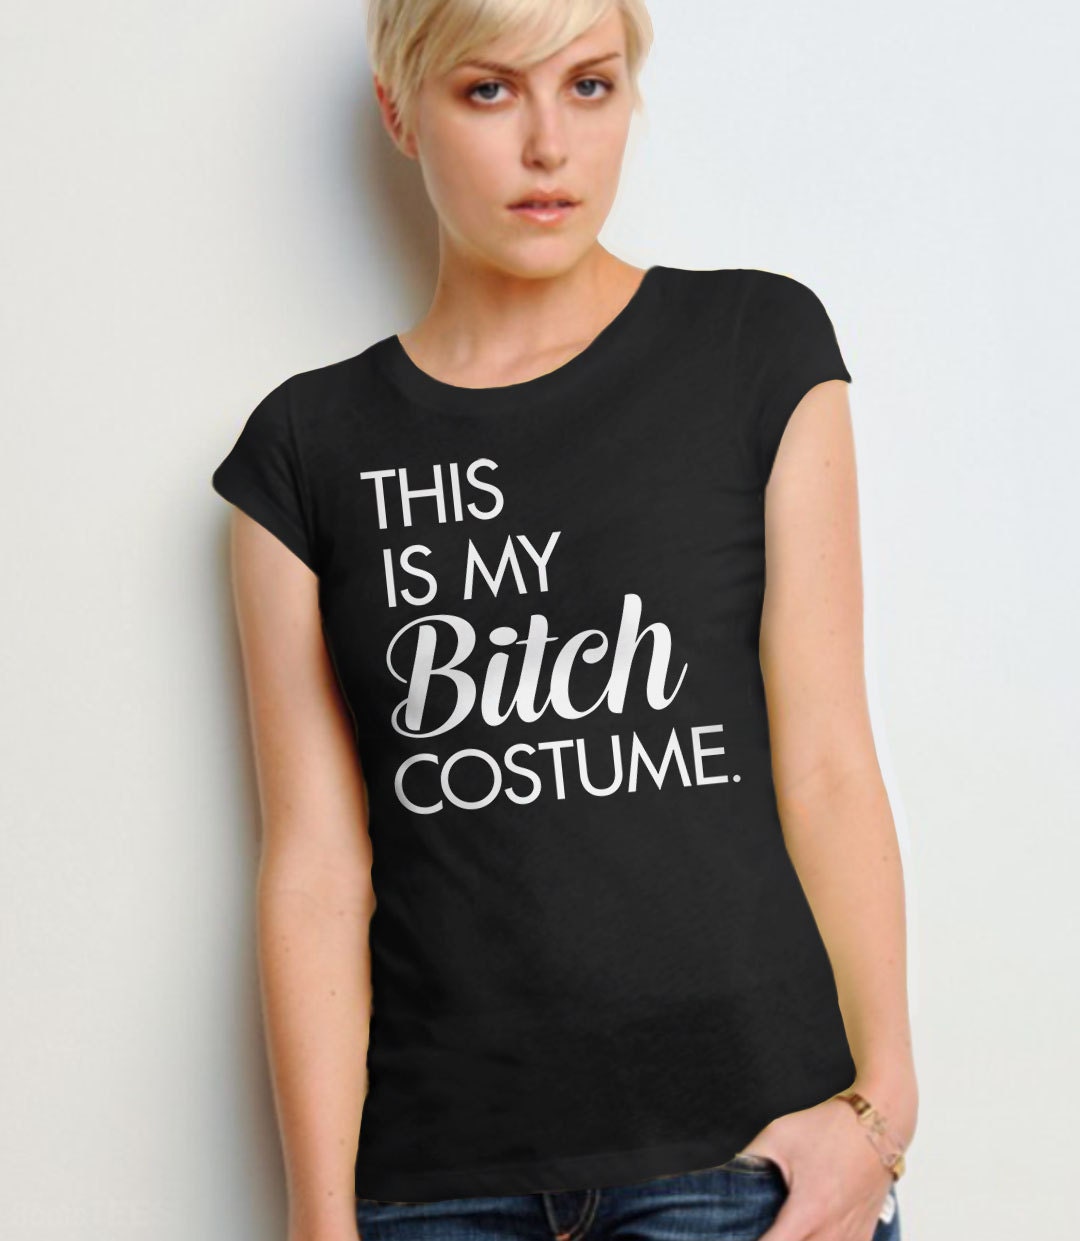 Funny Halloween Shirt for Women, Black Unisex XS by BootsTees